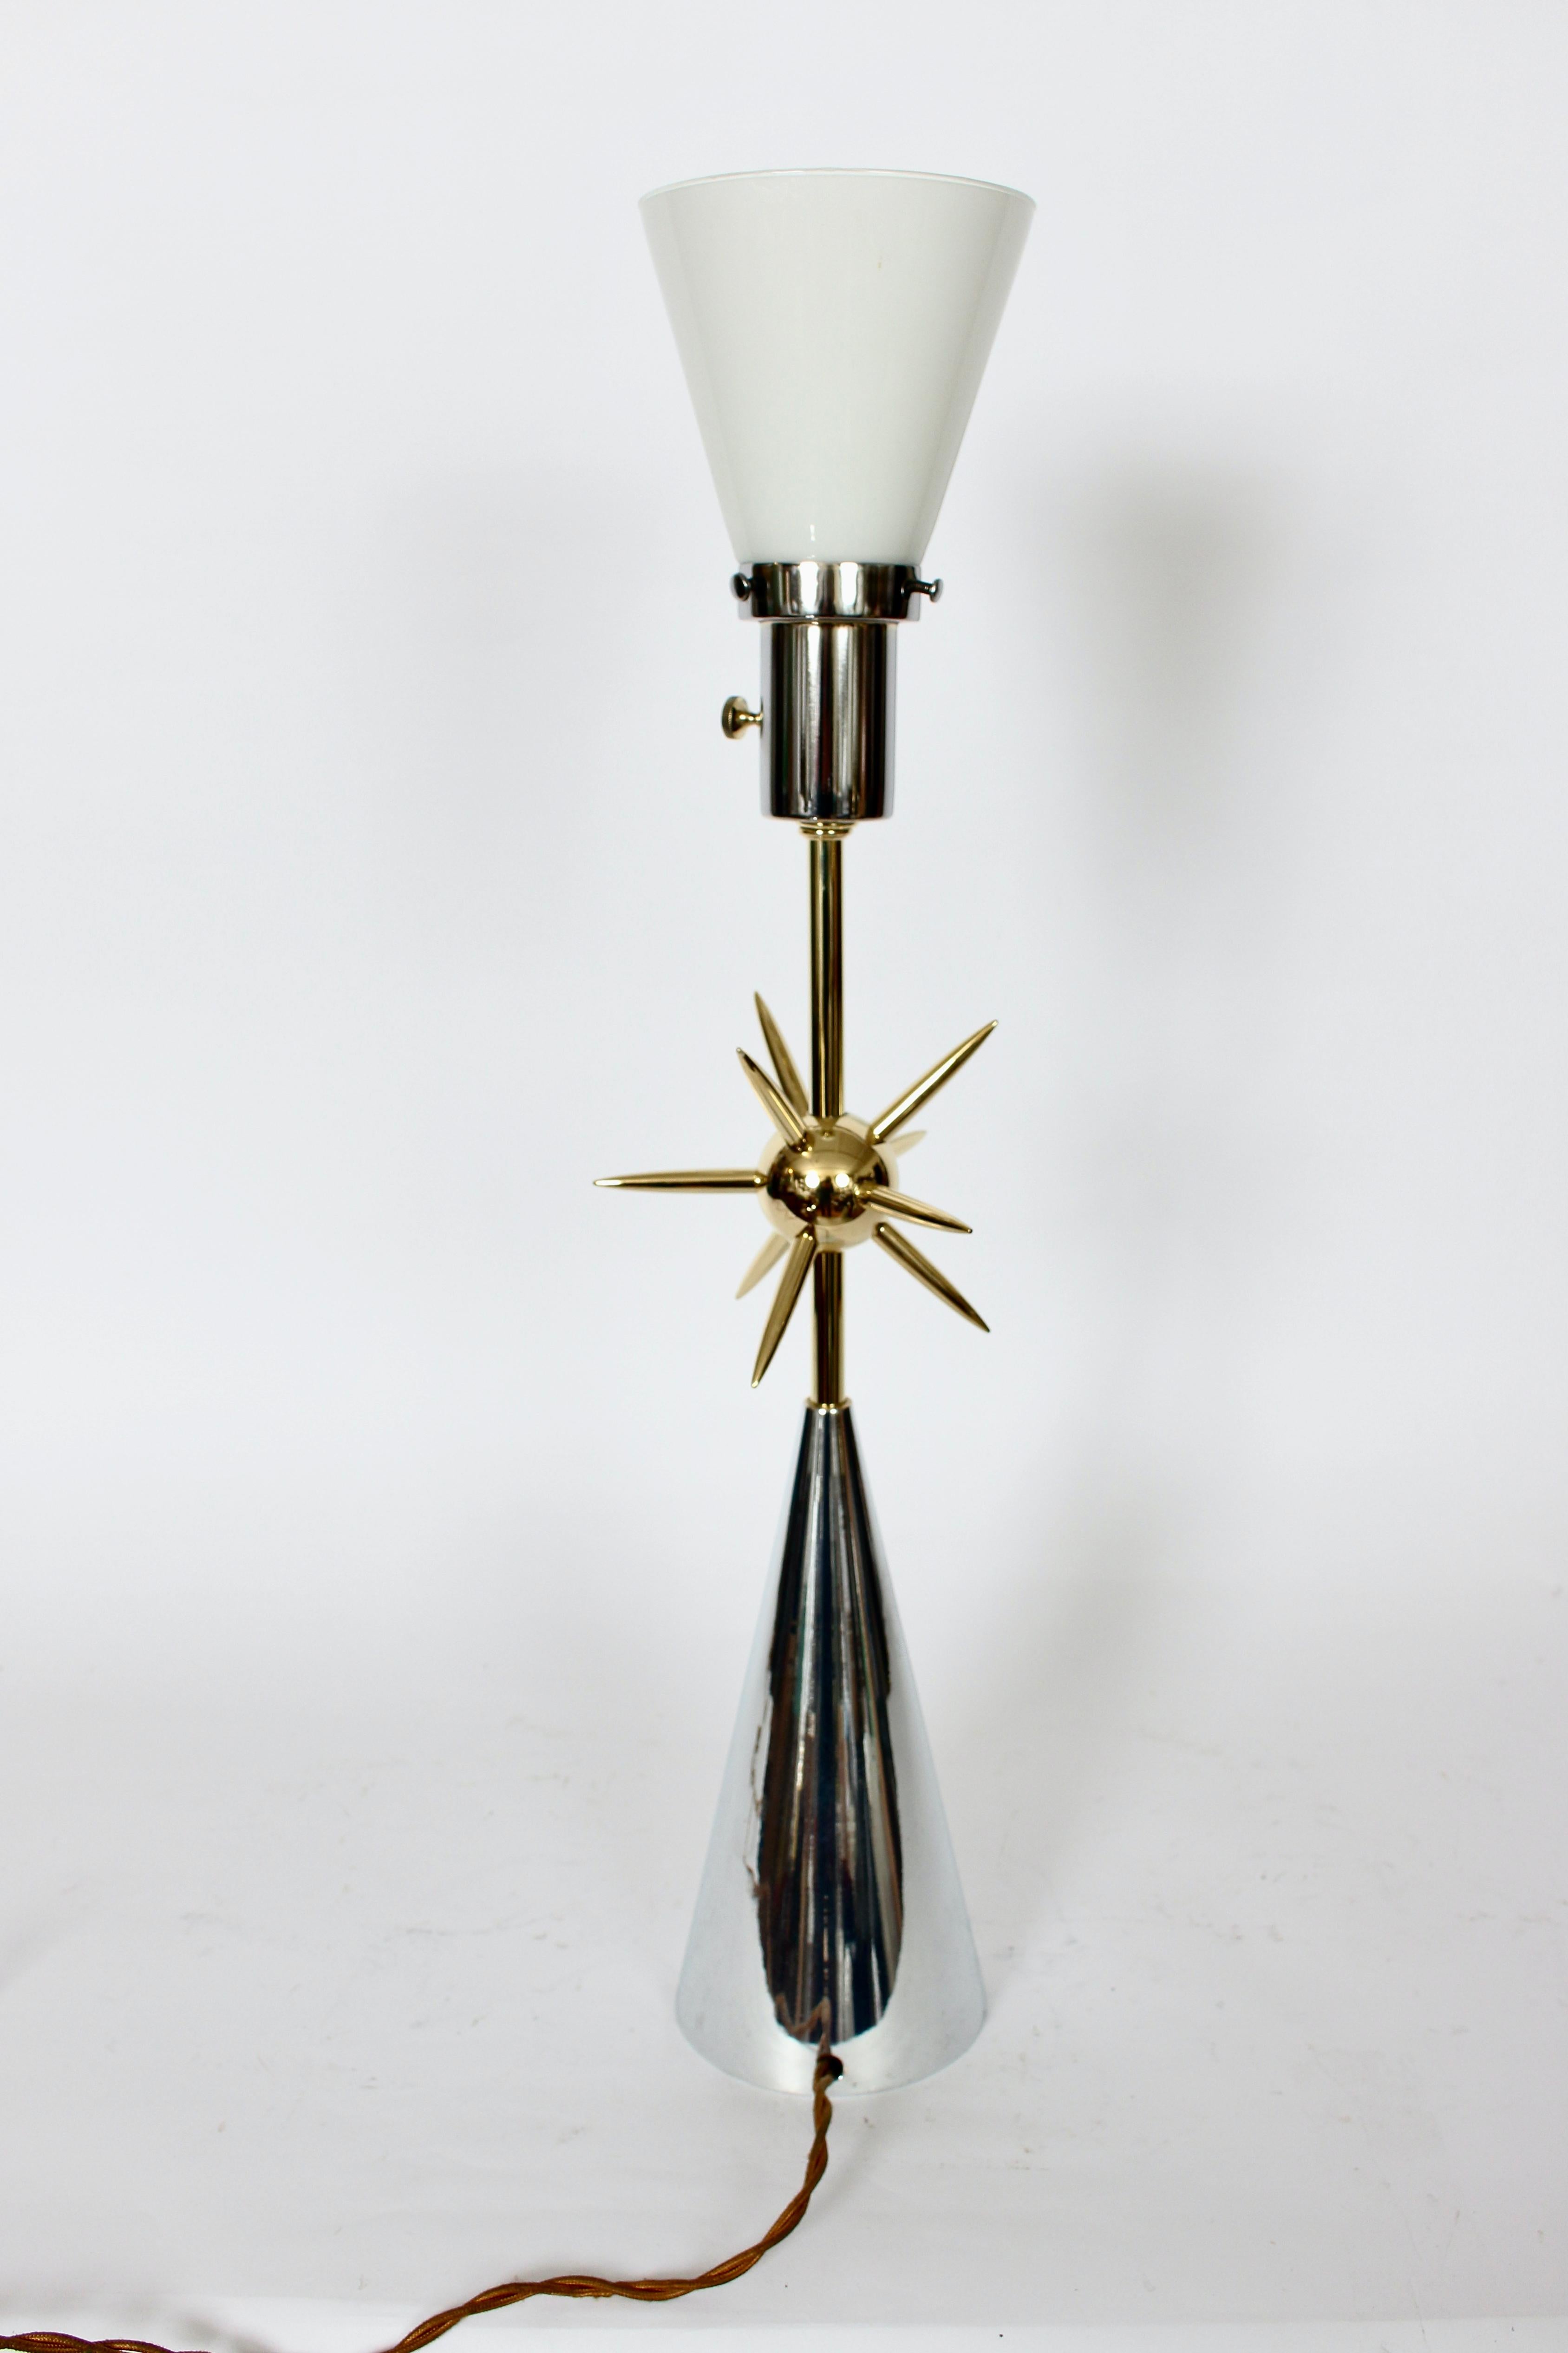 Mid-20th Century Vintage Mutual Sunset Lamp Co. Atomic Sputnik Polished Metals Table Lamp, 1950's For Sale